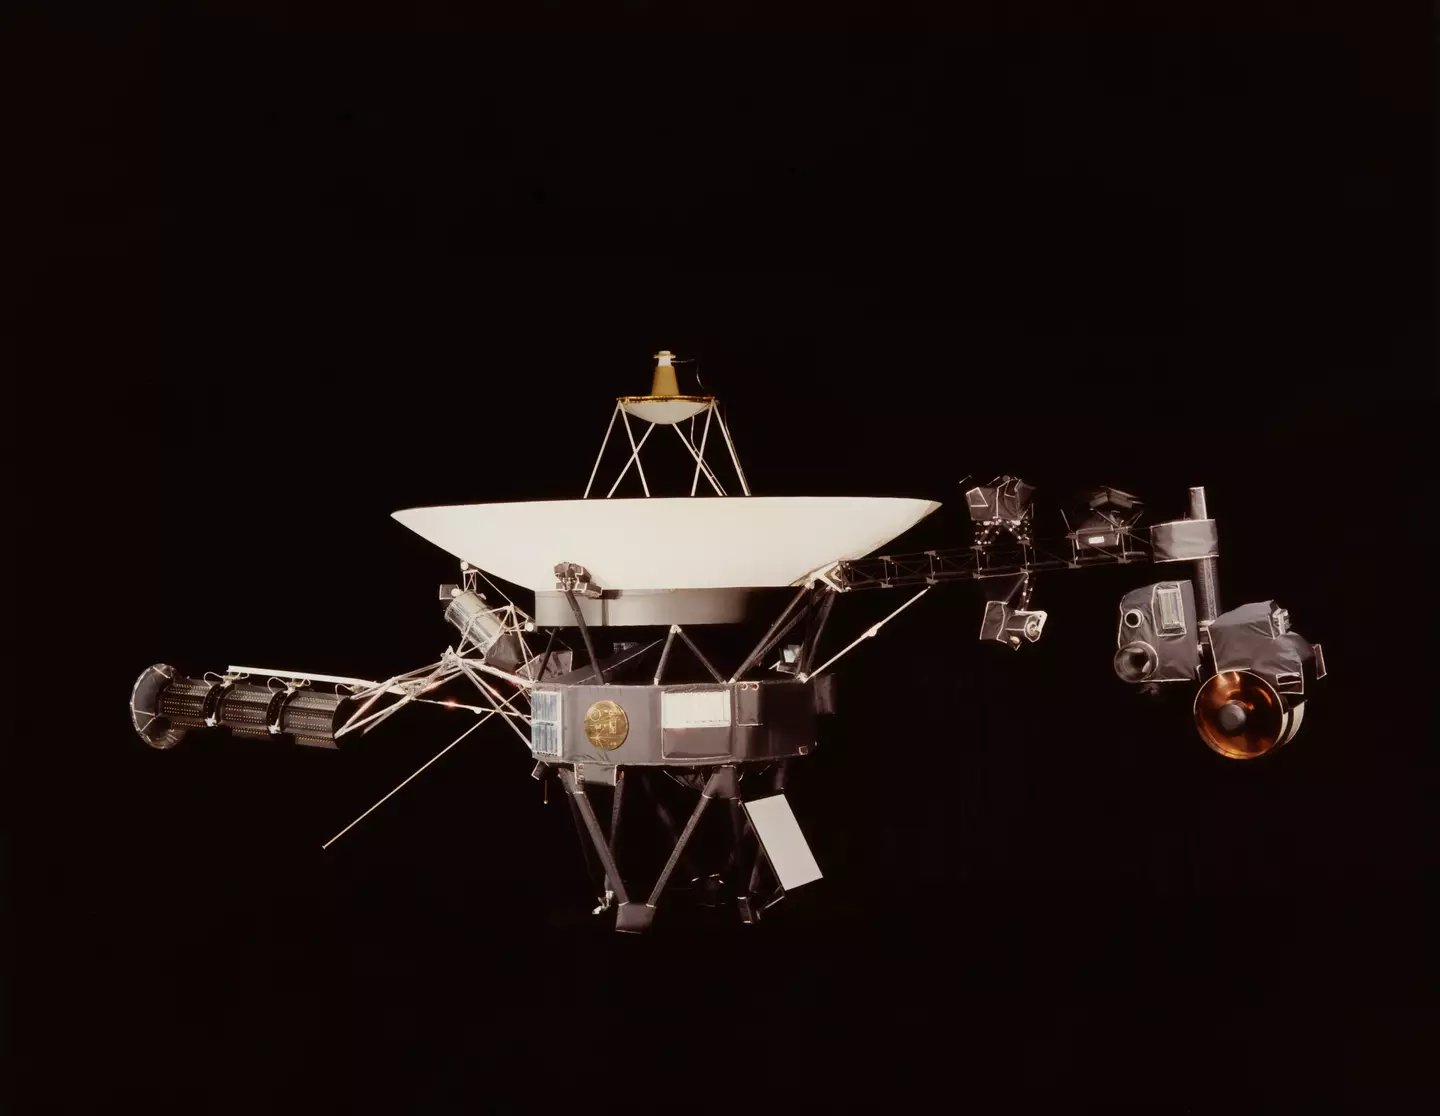 Voyager 1 left the solar system in 2012.